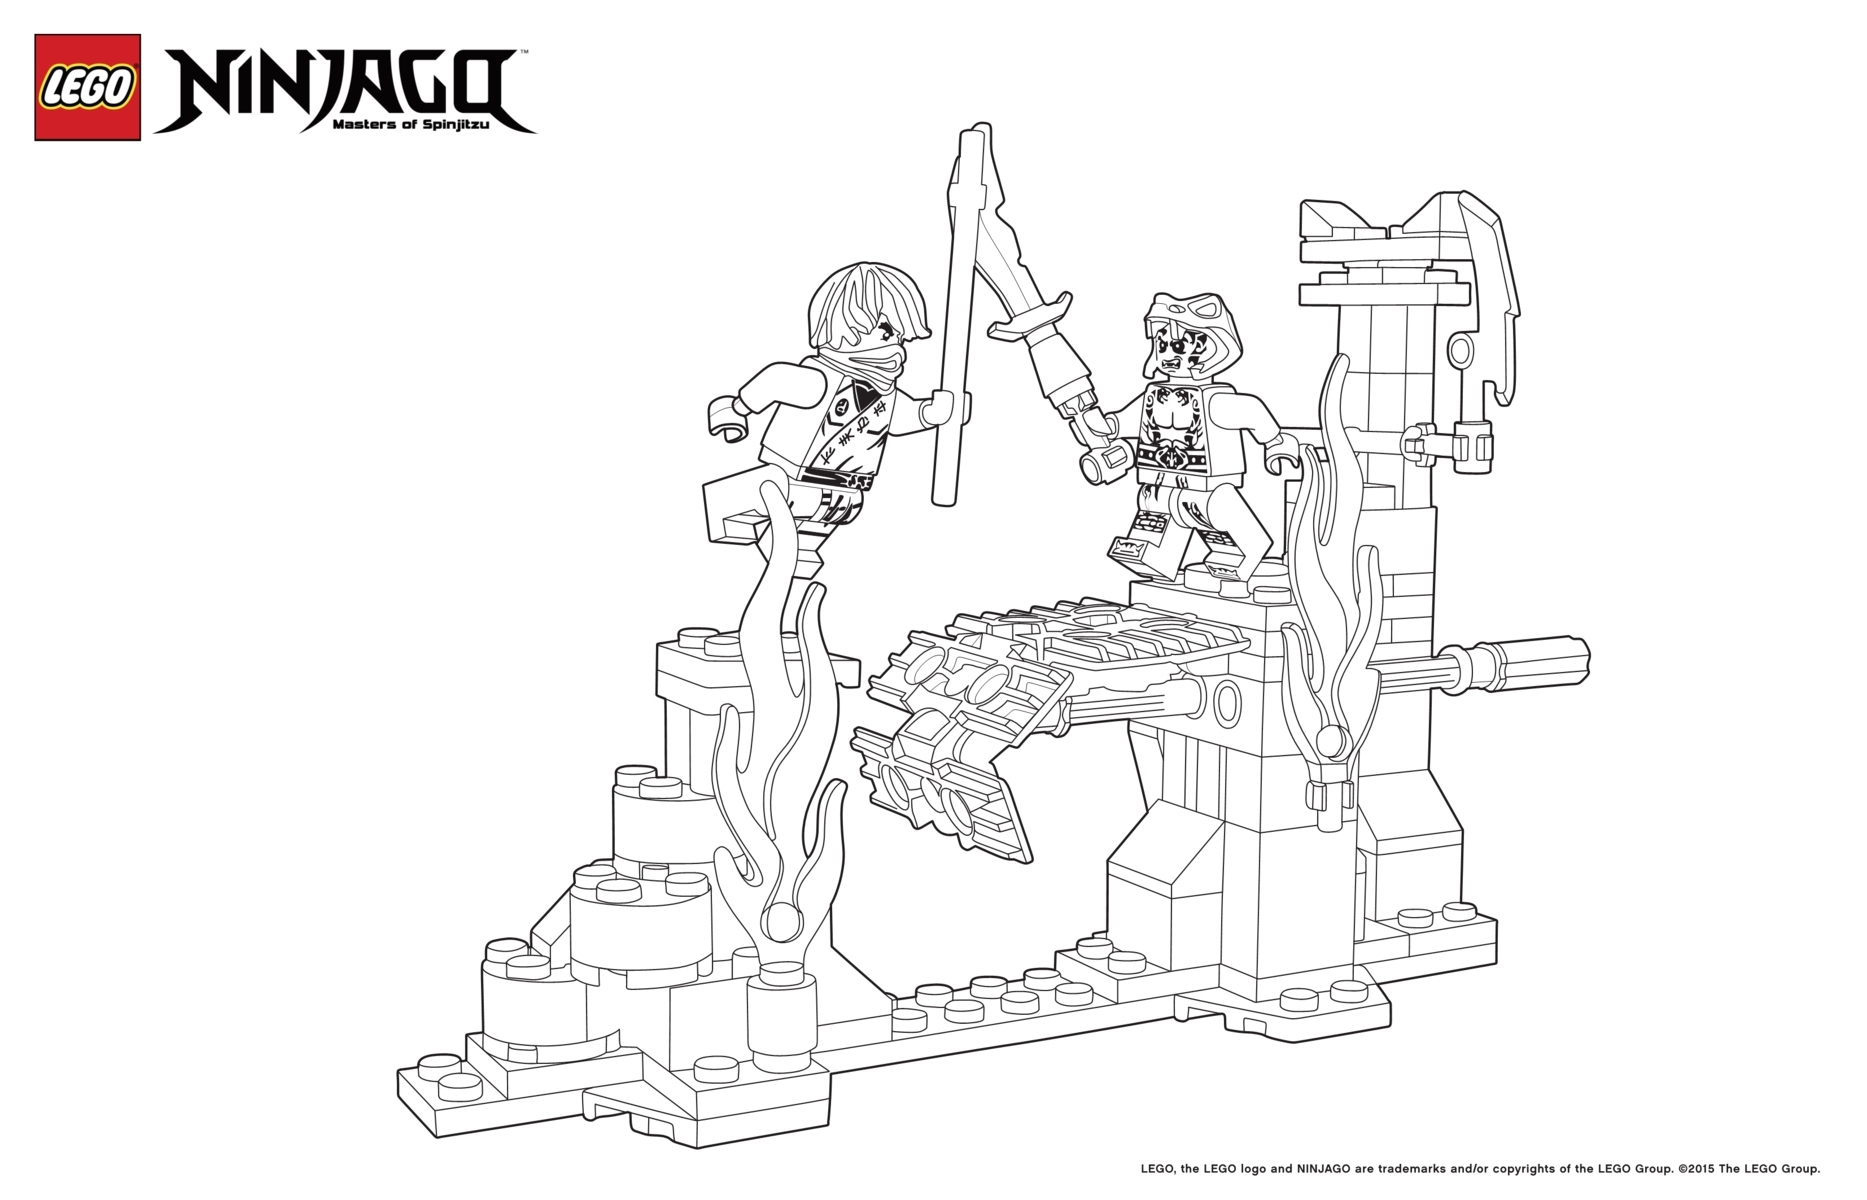 World Of Ninjago Against Enemy Coloring Page